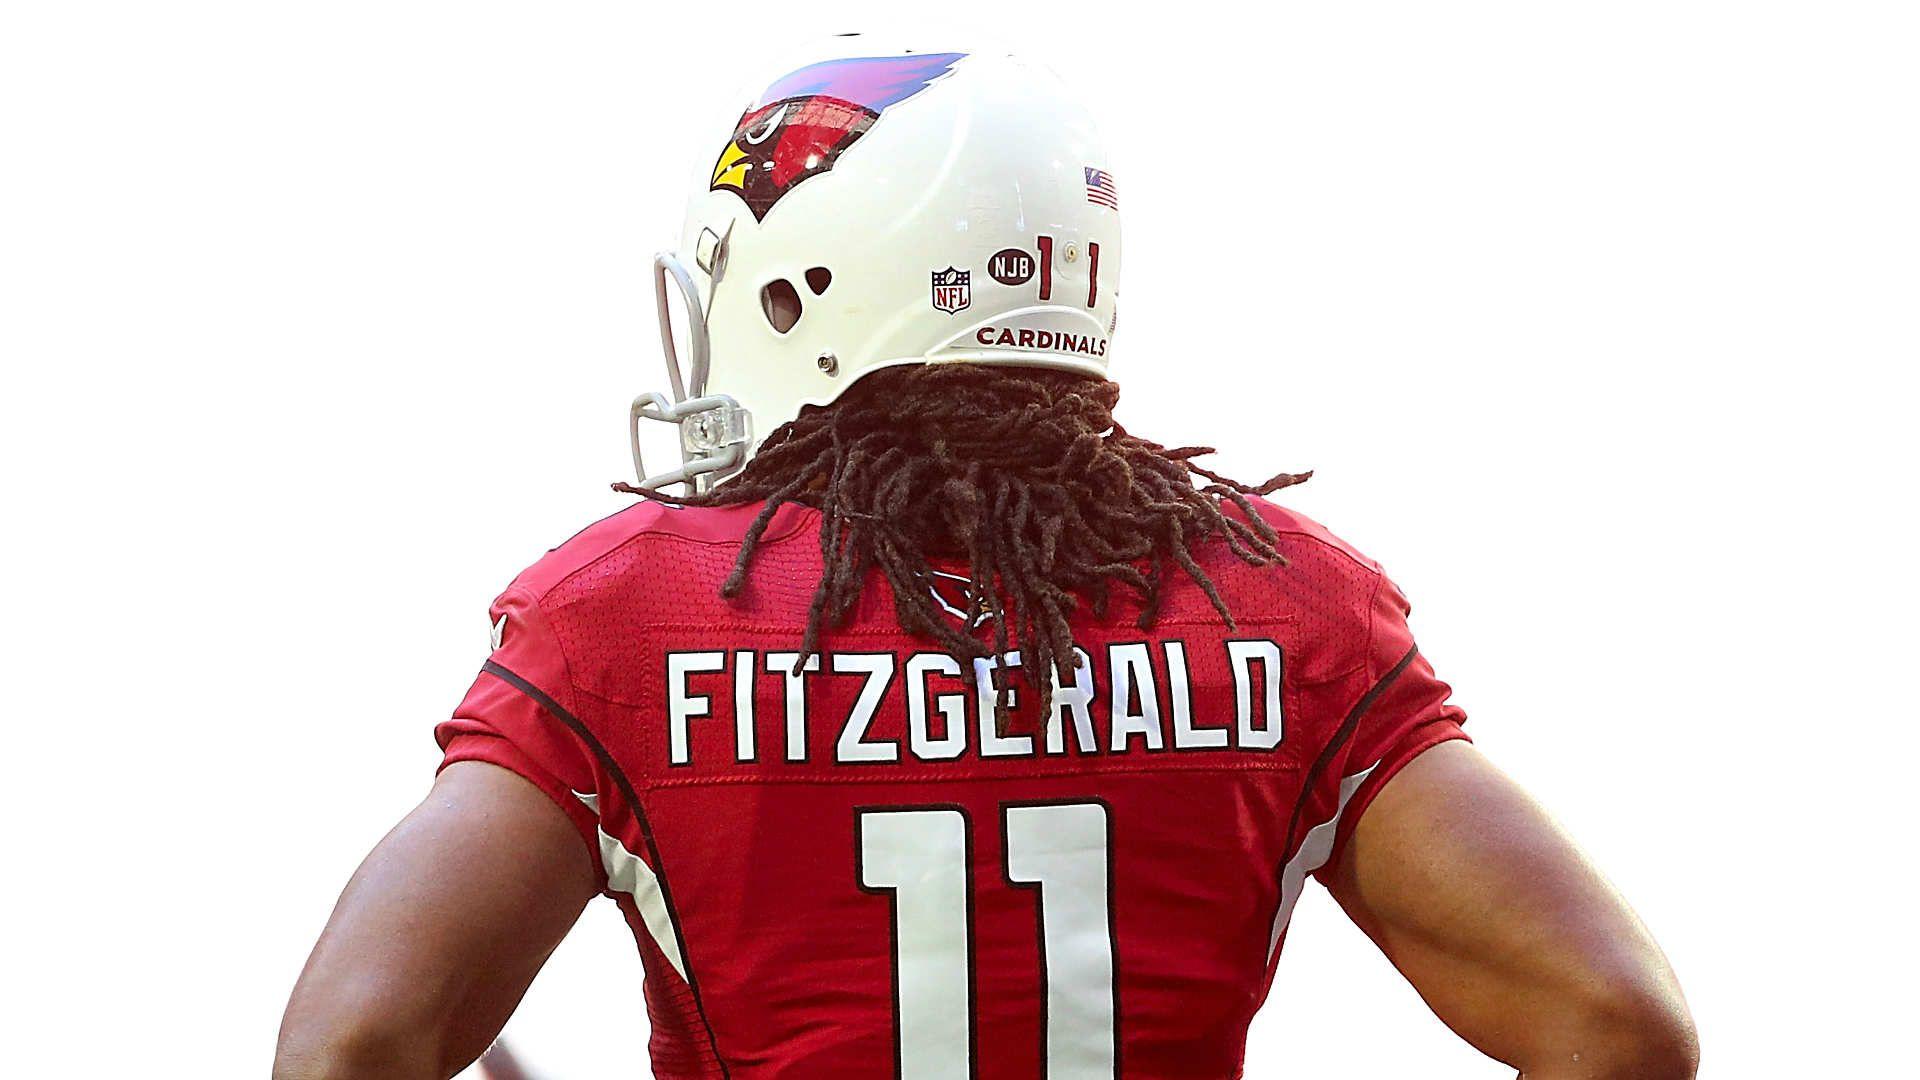 Larry Fitzgerald uncertain about NFL future after 13 seasons